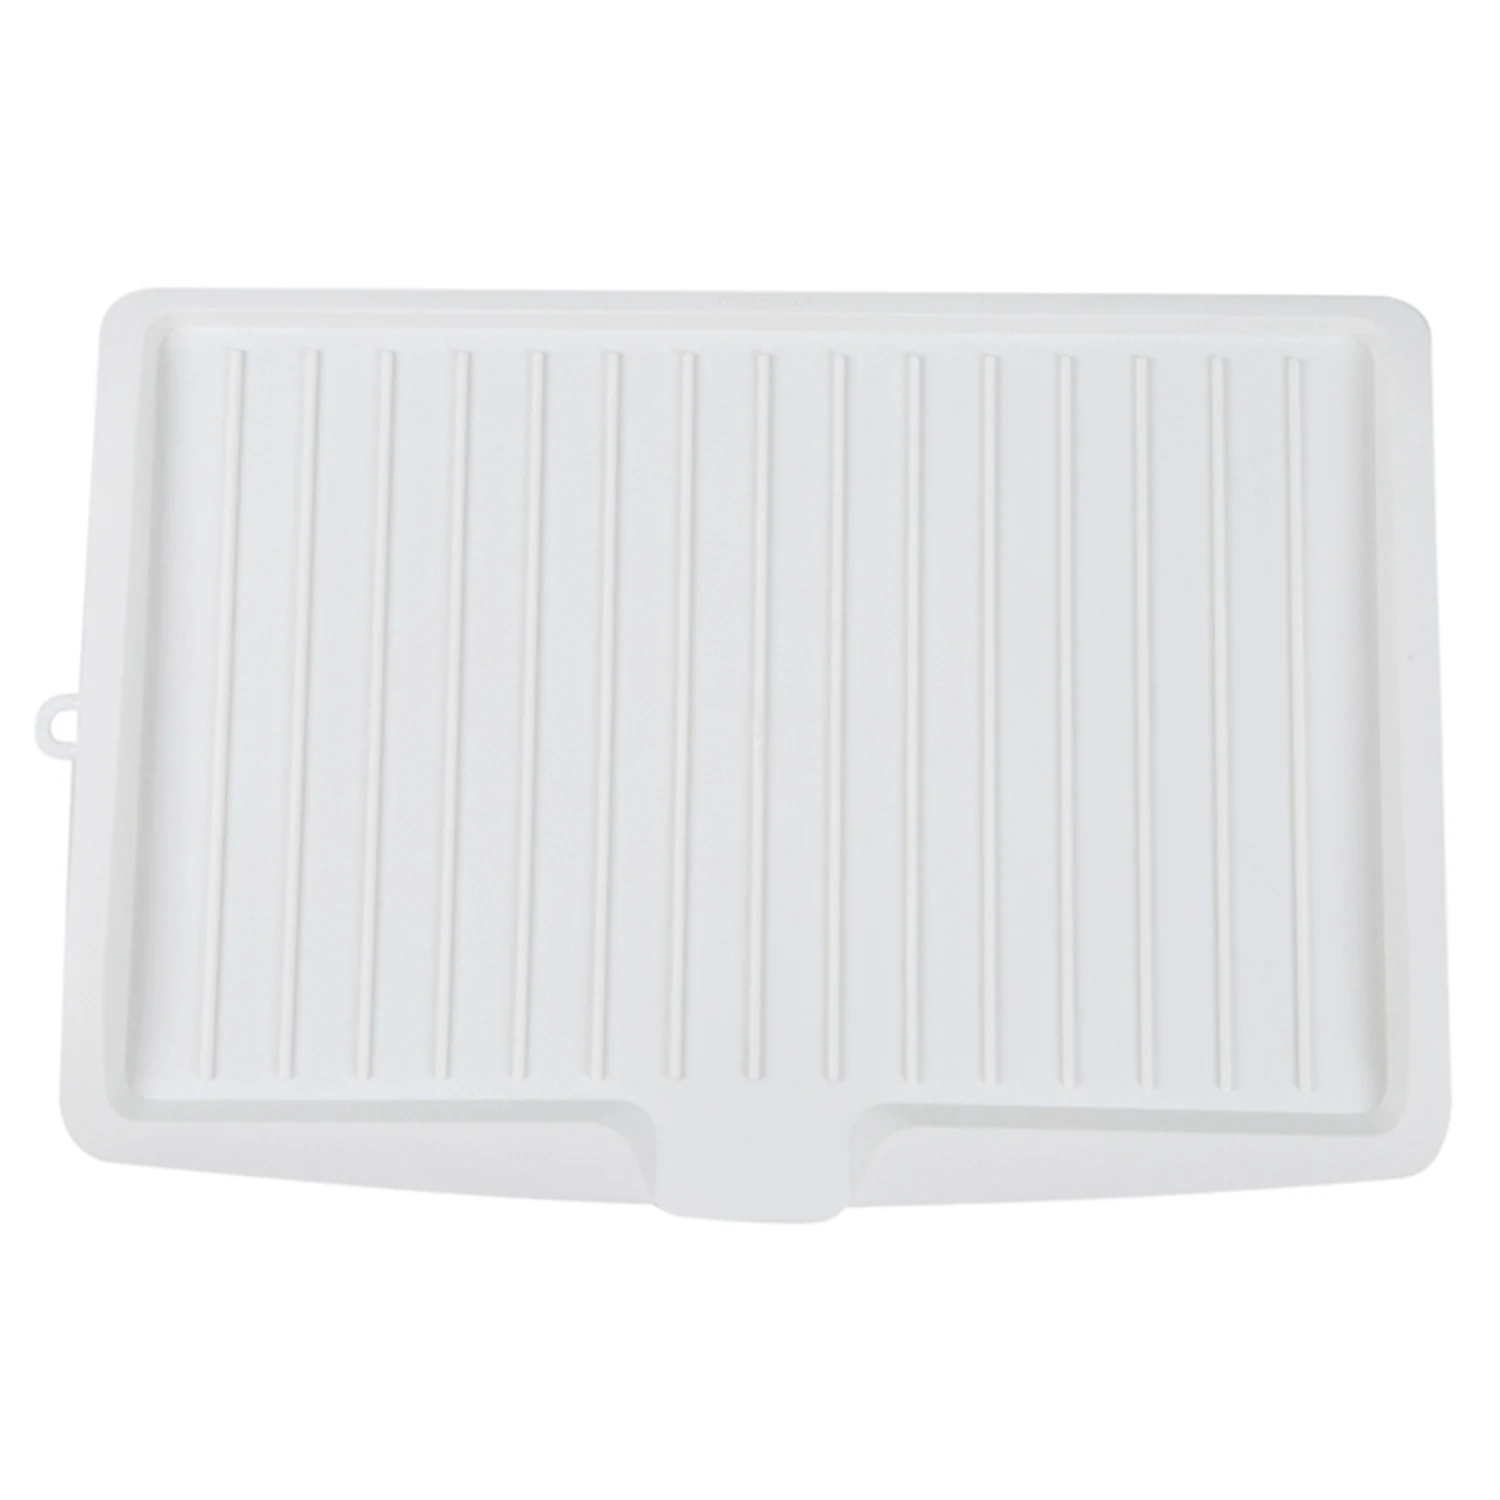 Plastic Dish Drainer Drip Tray Plate Cutlery Rack Kitchen Sink Rack Holder Large white